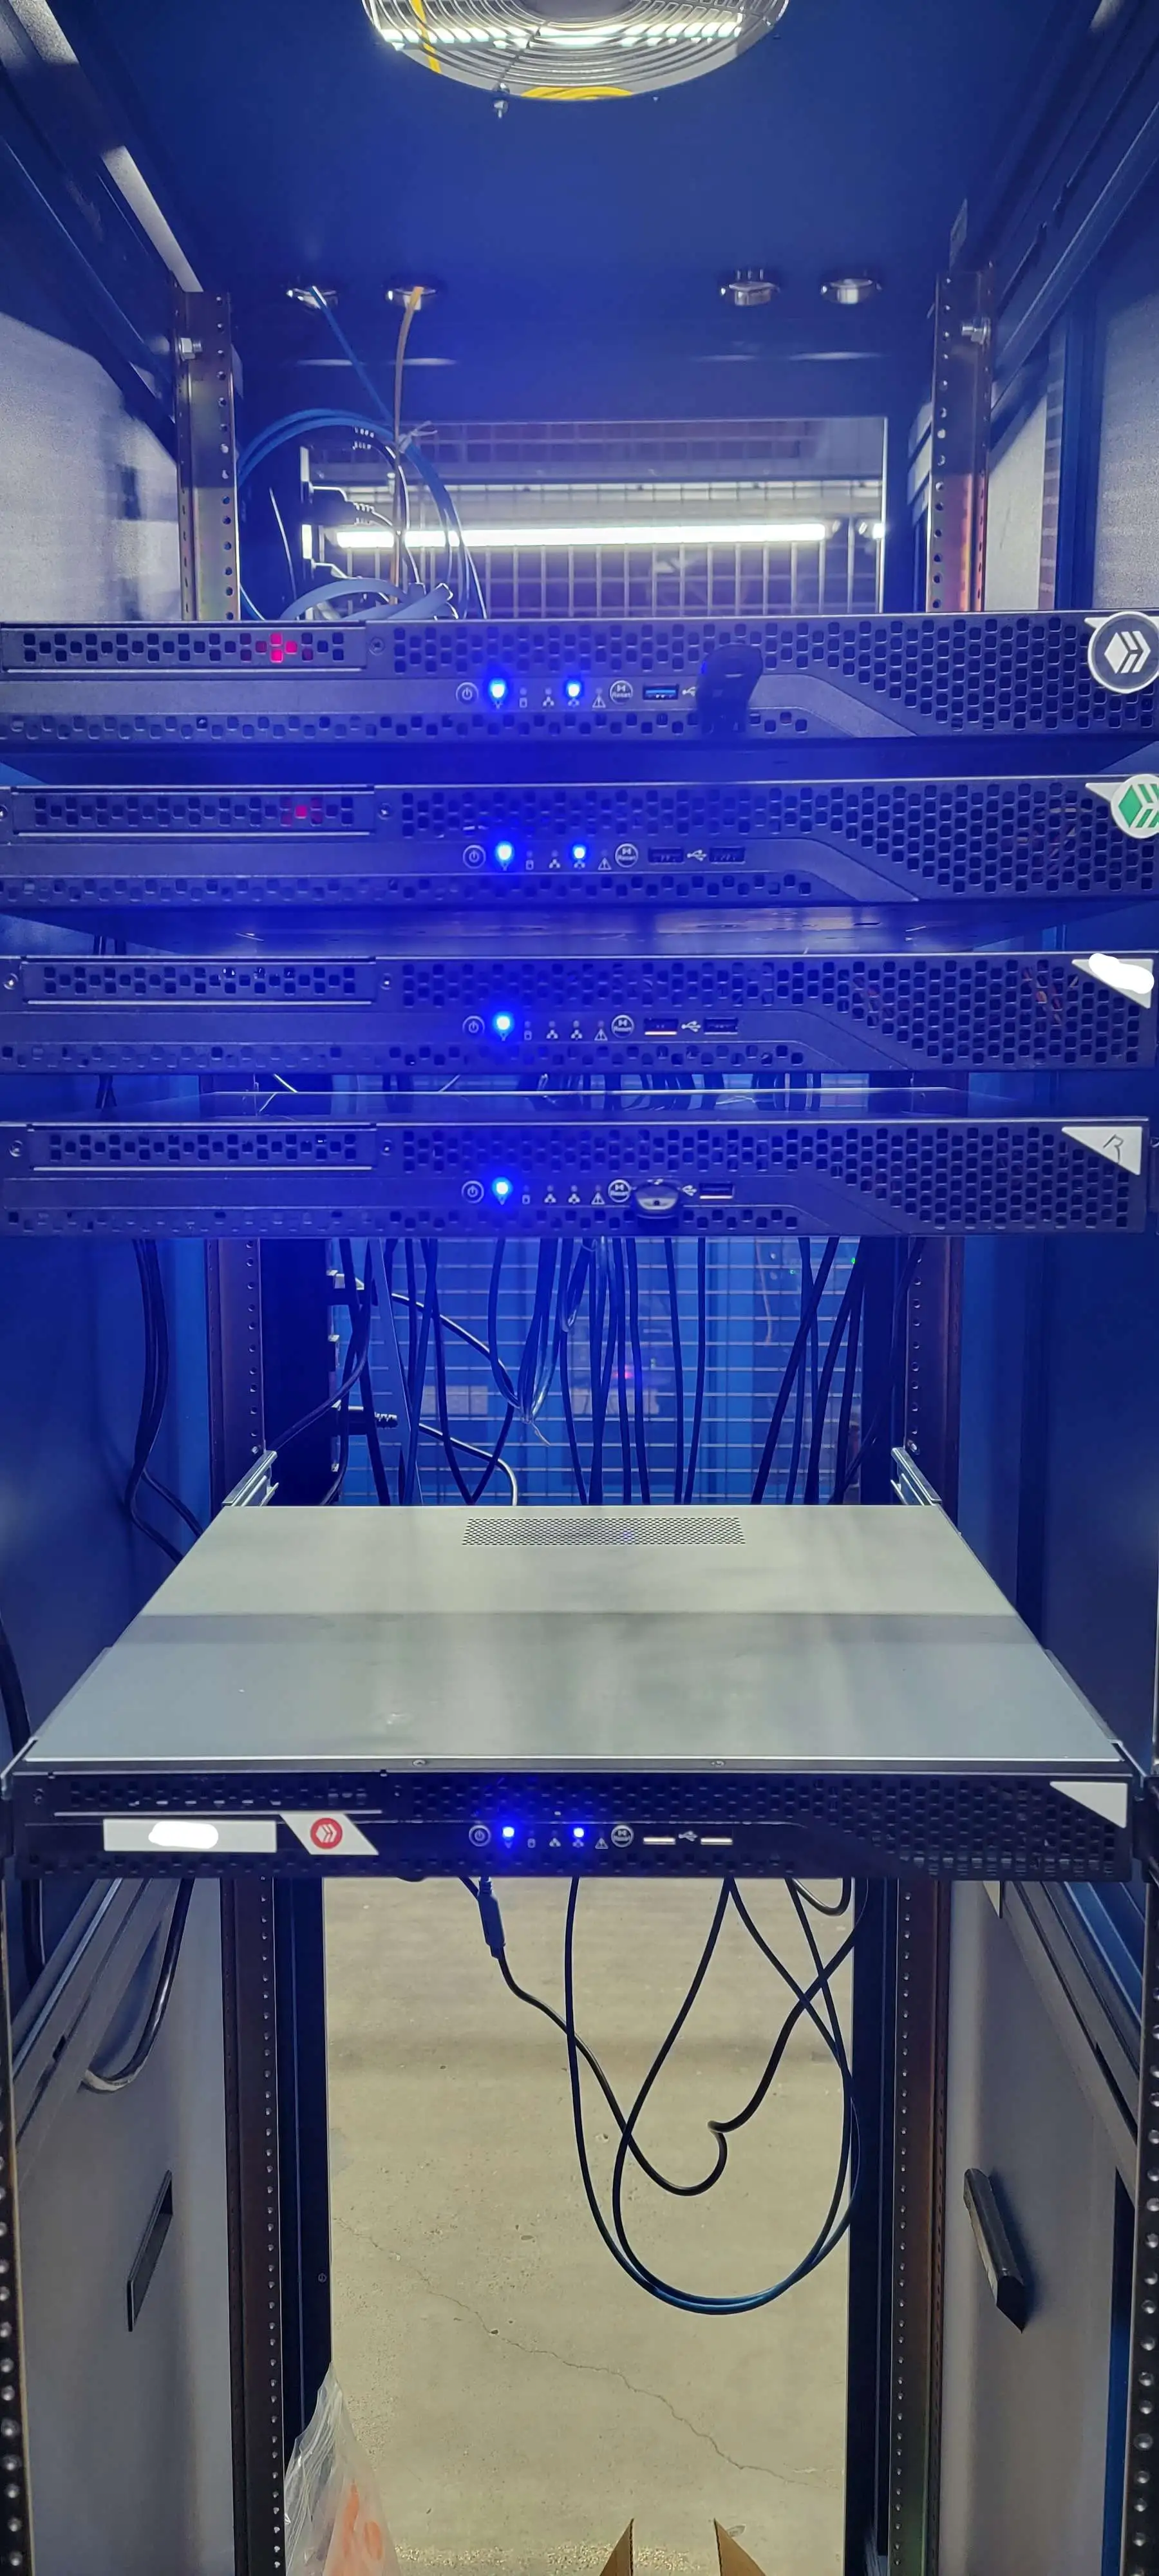 Images of Servers in a Rack